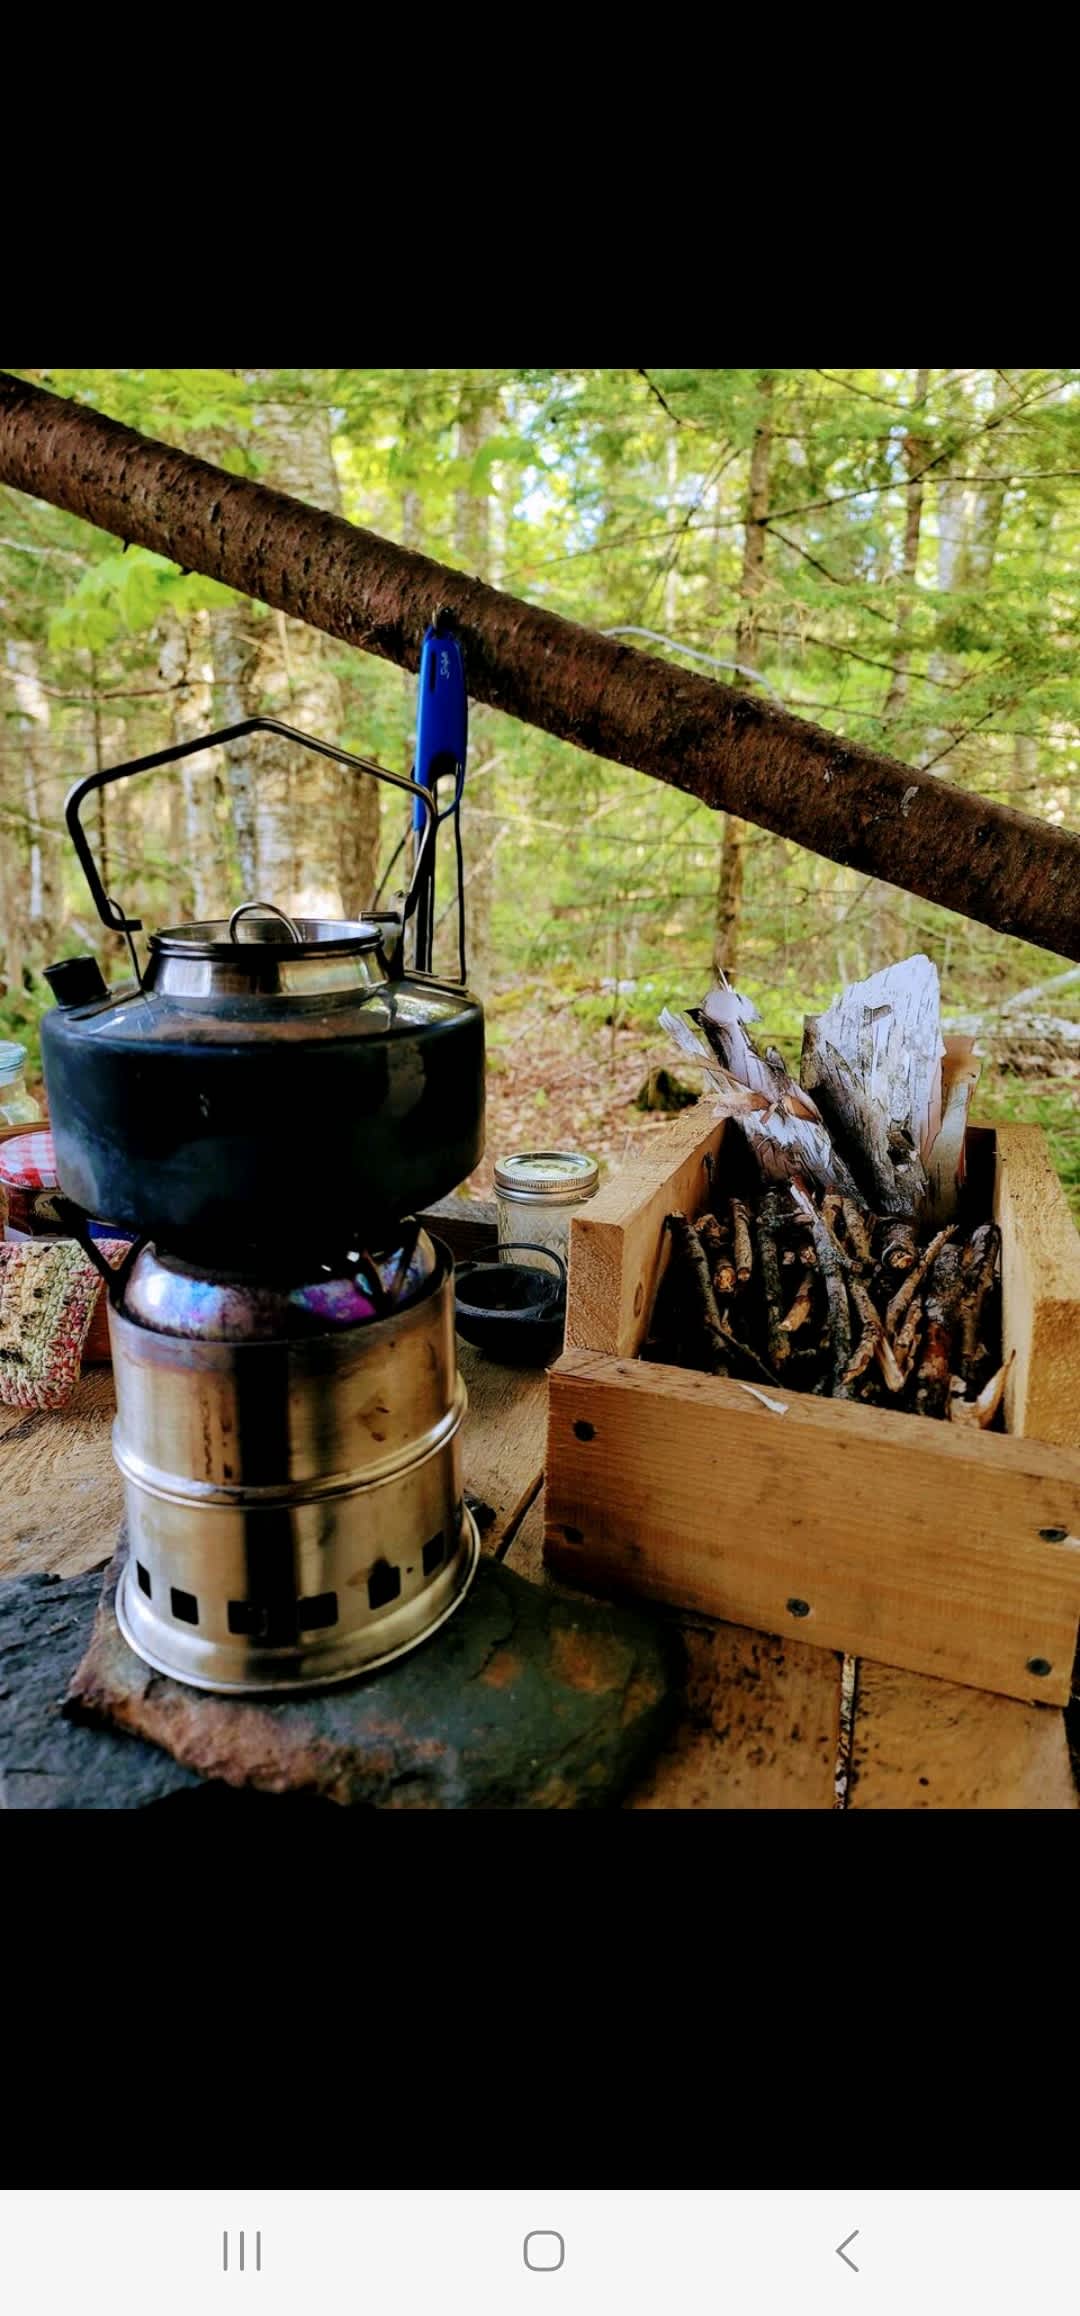 Kettle and wood fired burner